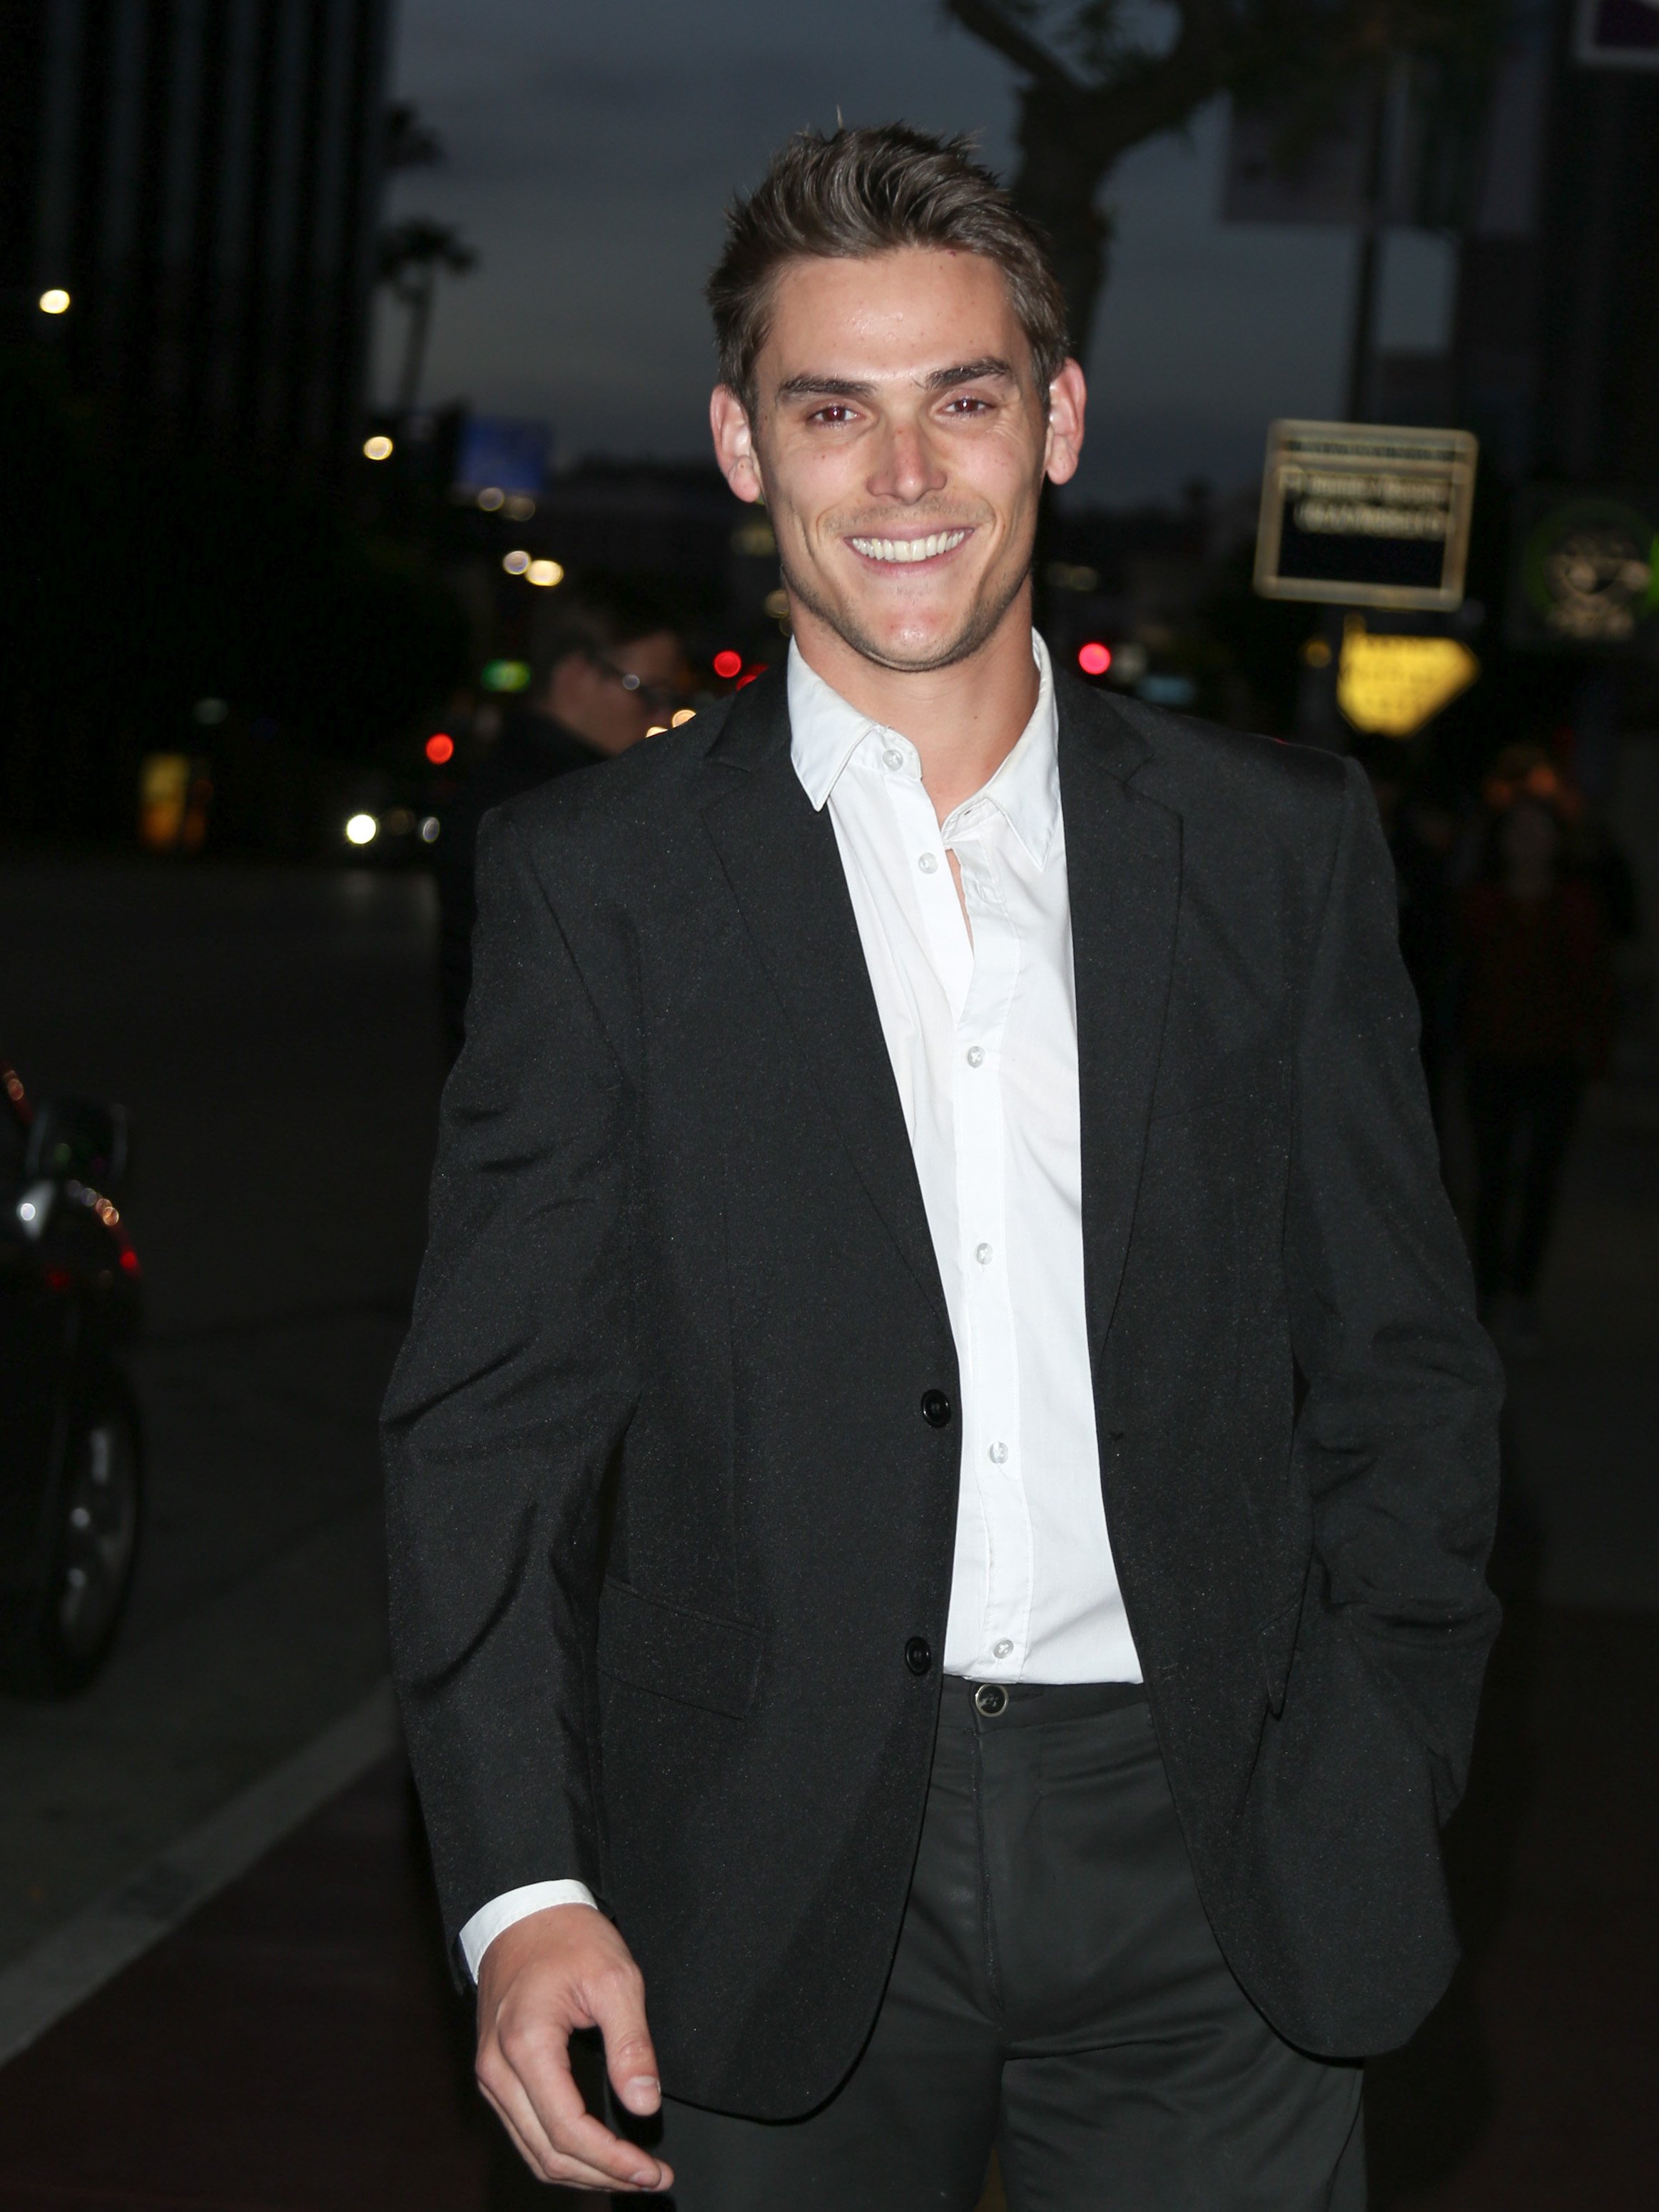 'The Young and the Restless' actor Mark Grossman wearing a black suit and white shirt; standing on a street.